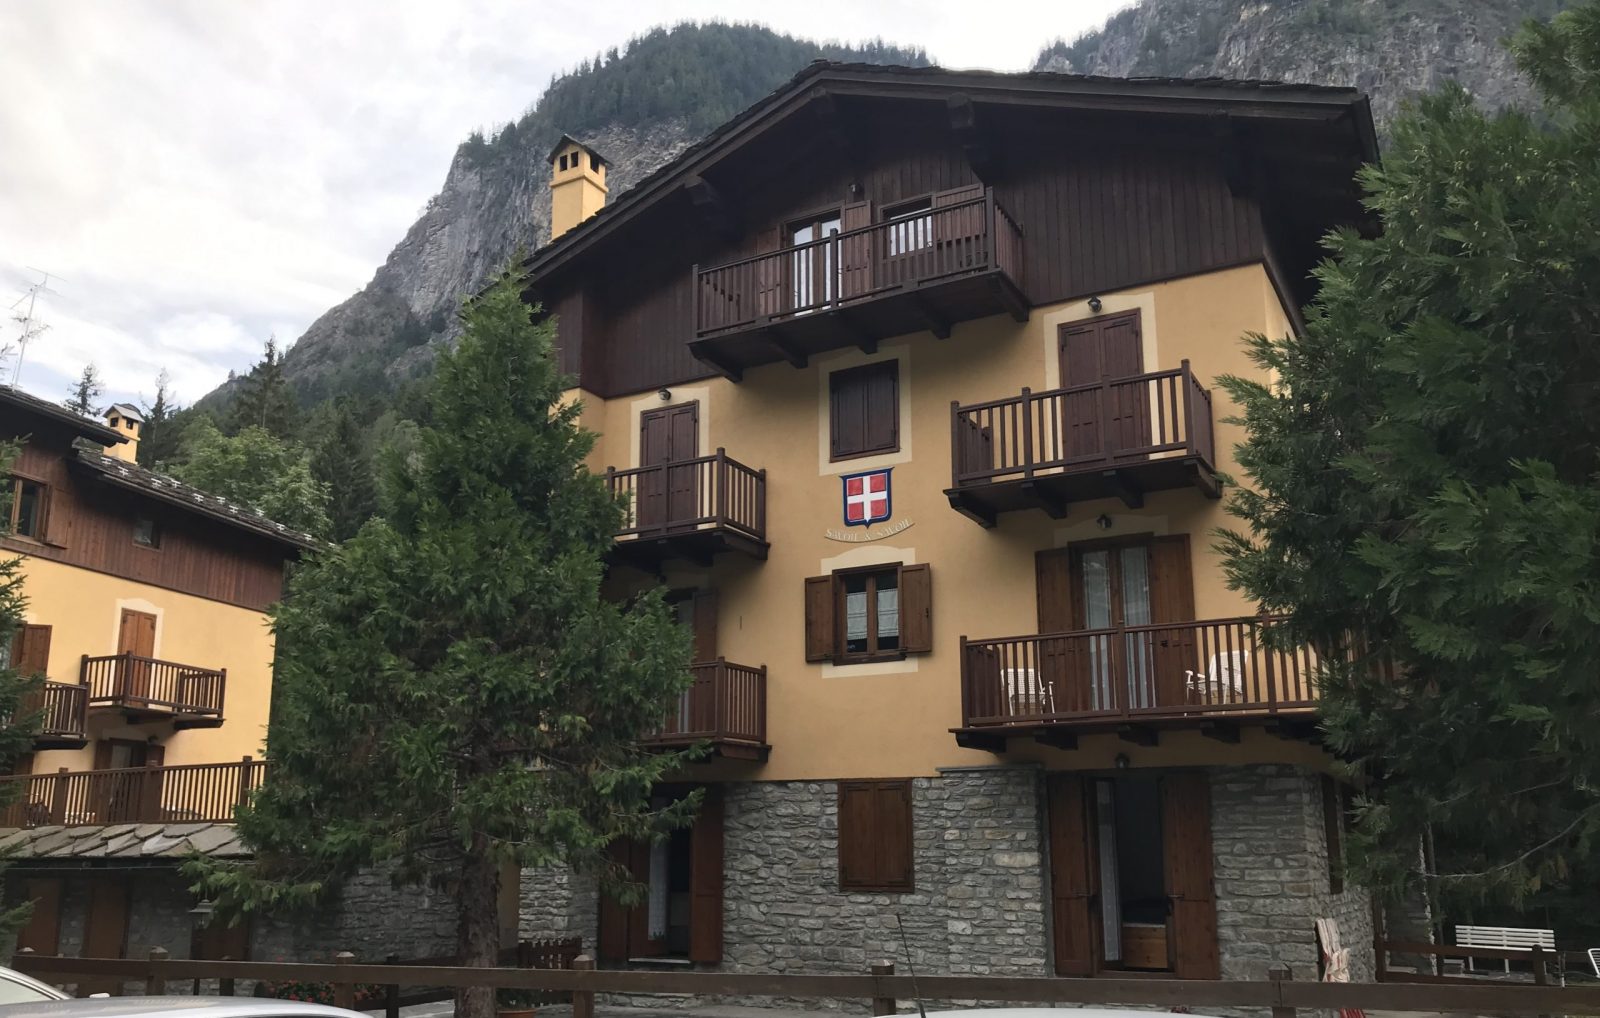 The property at Champex, just out of Pre-Saint-Didier. My experience of buying a home in the Italian Alps.